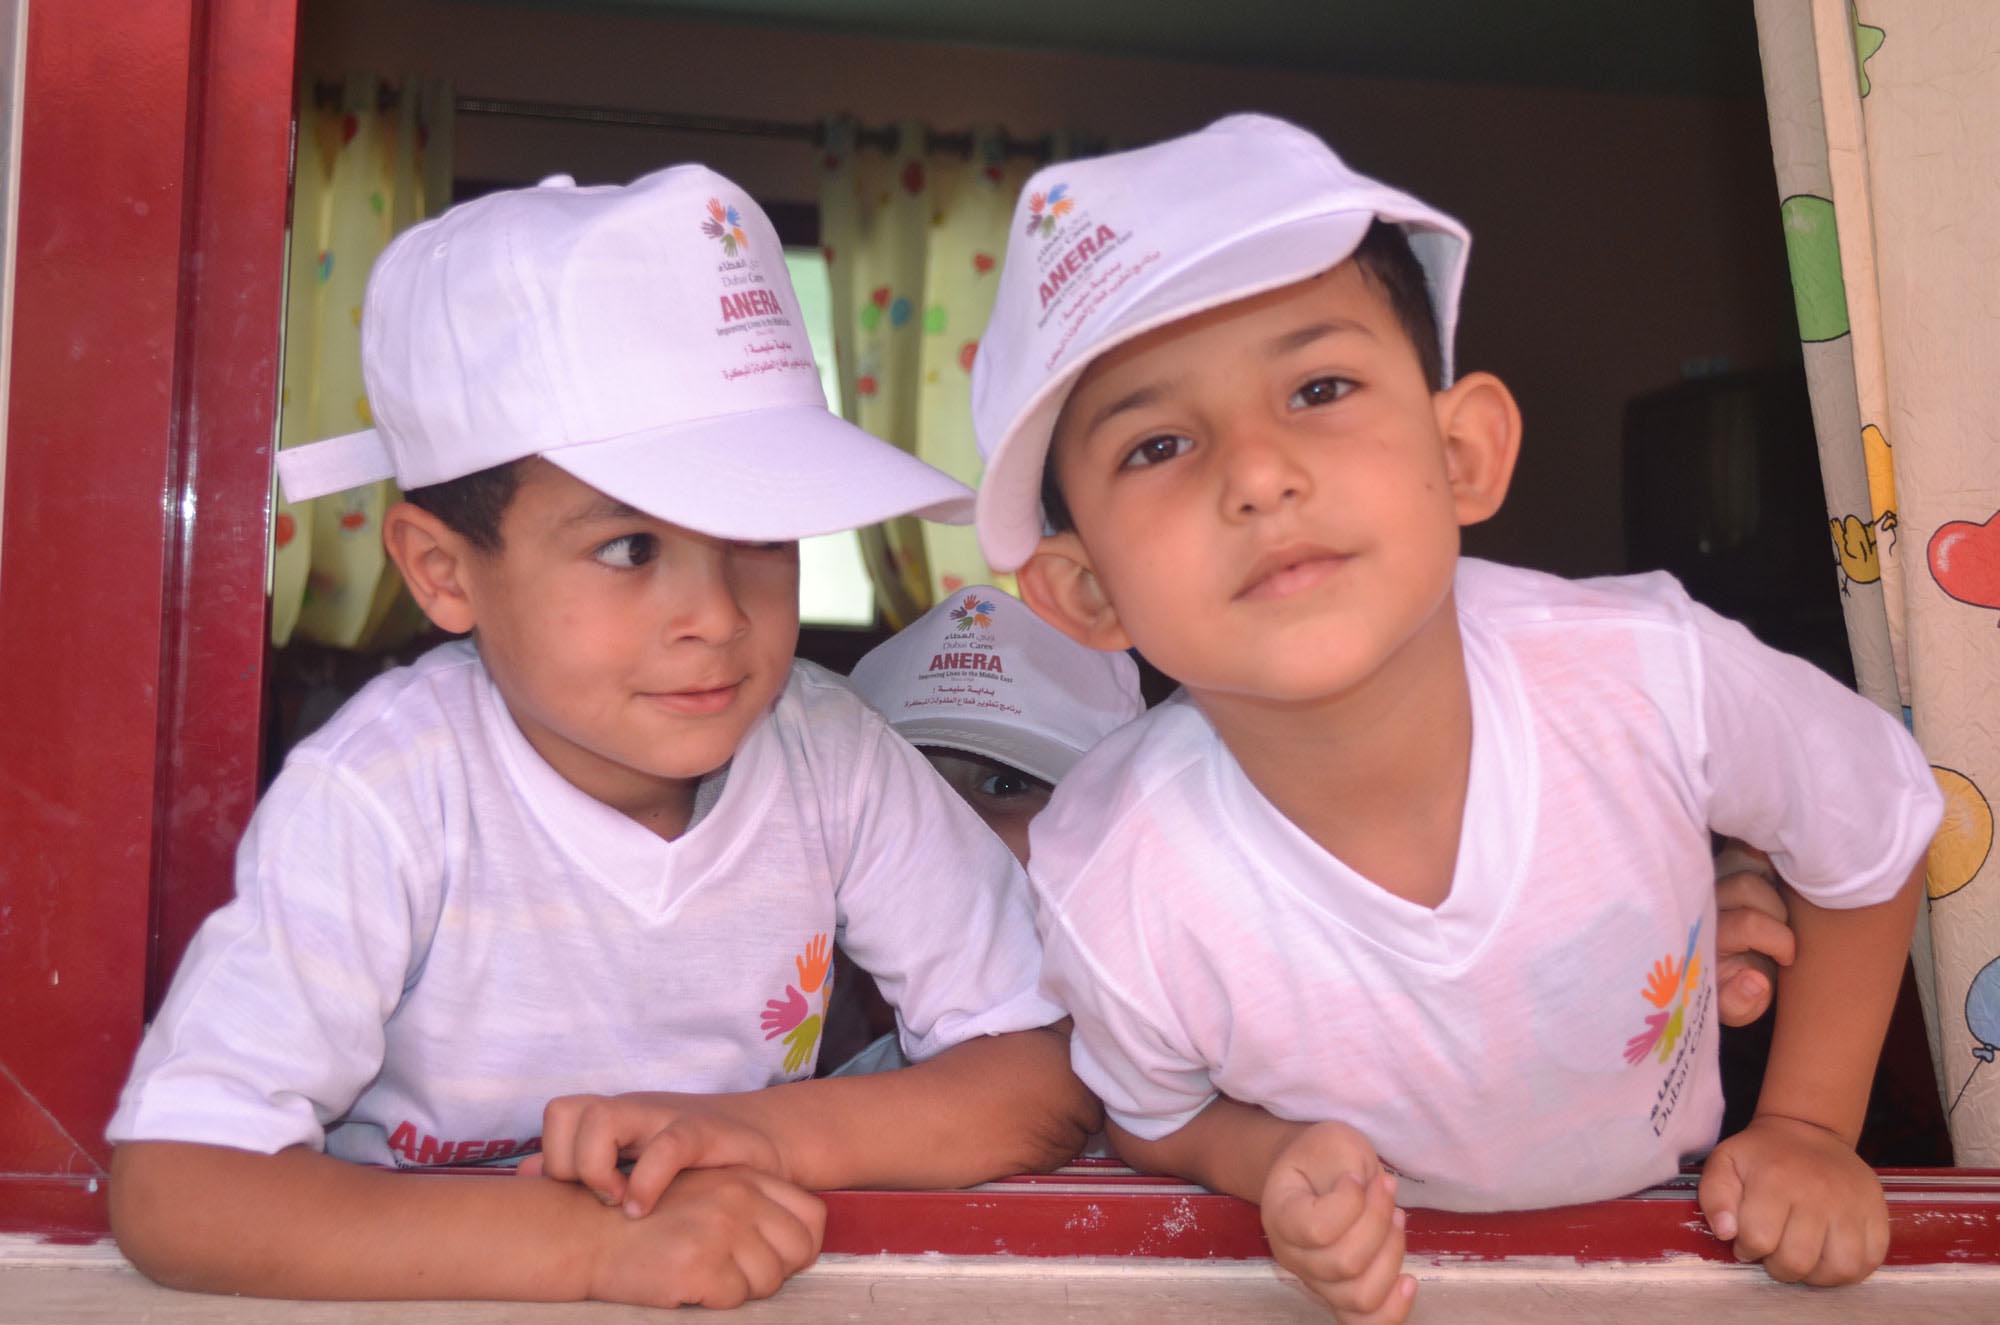 Two Gaza boys play in their new camp t-shirts at one of Anera’s summer camps at a preschool in northern Gaza.